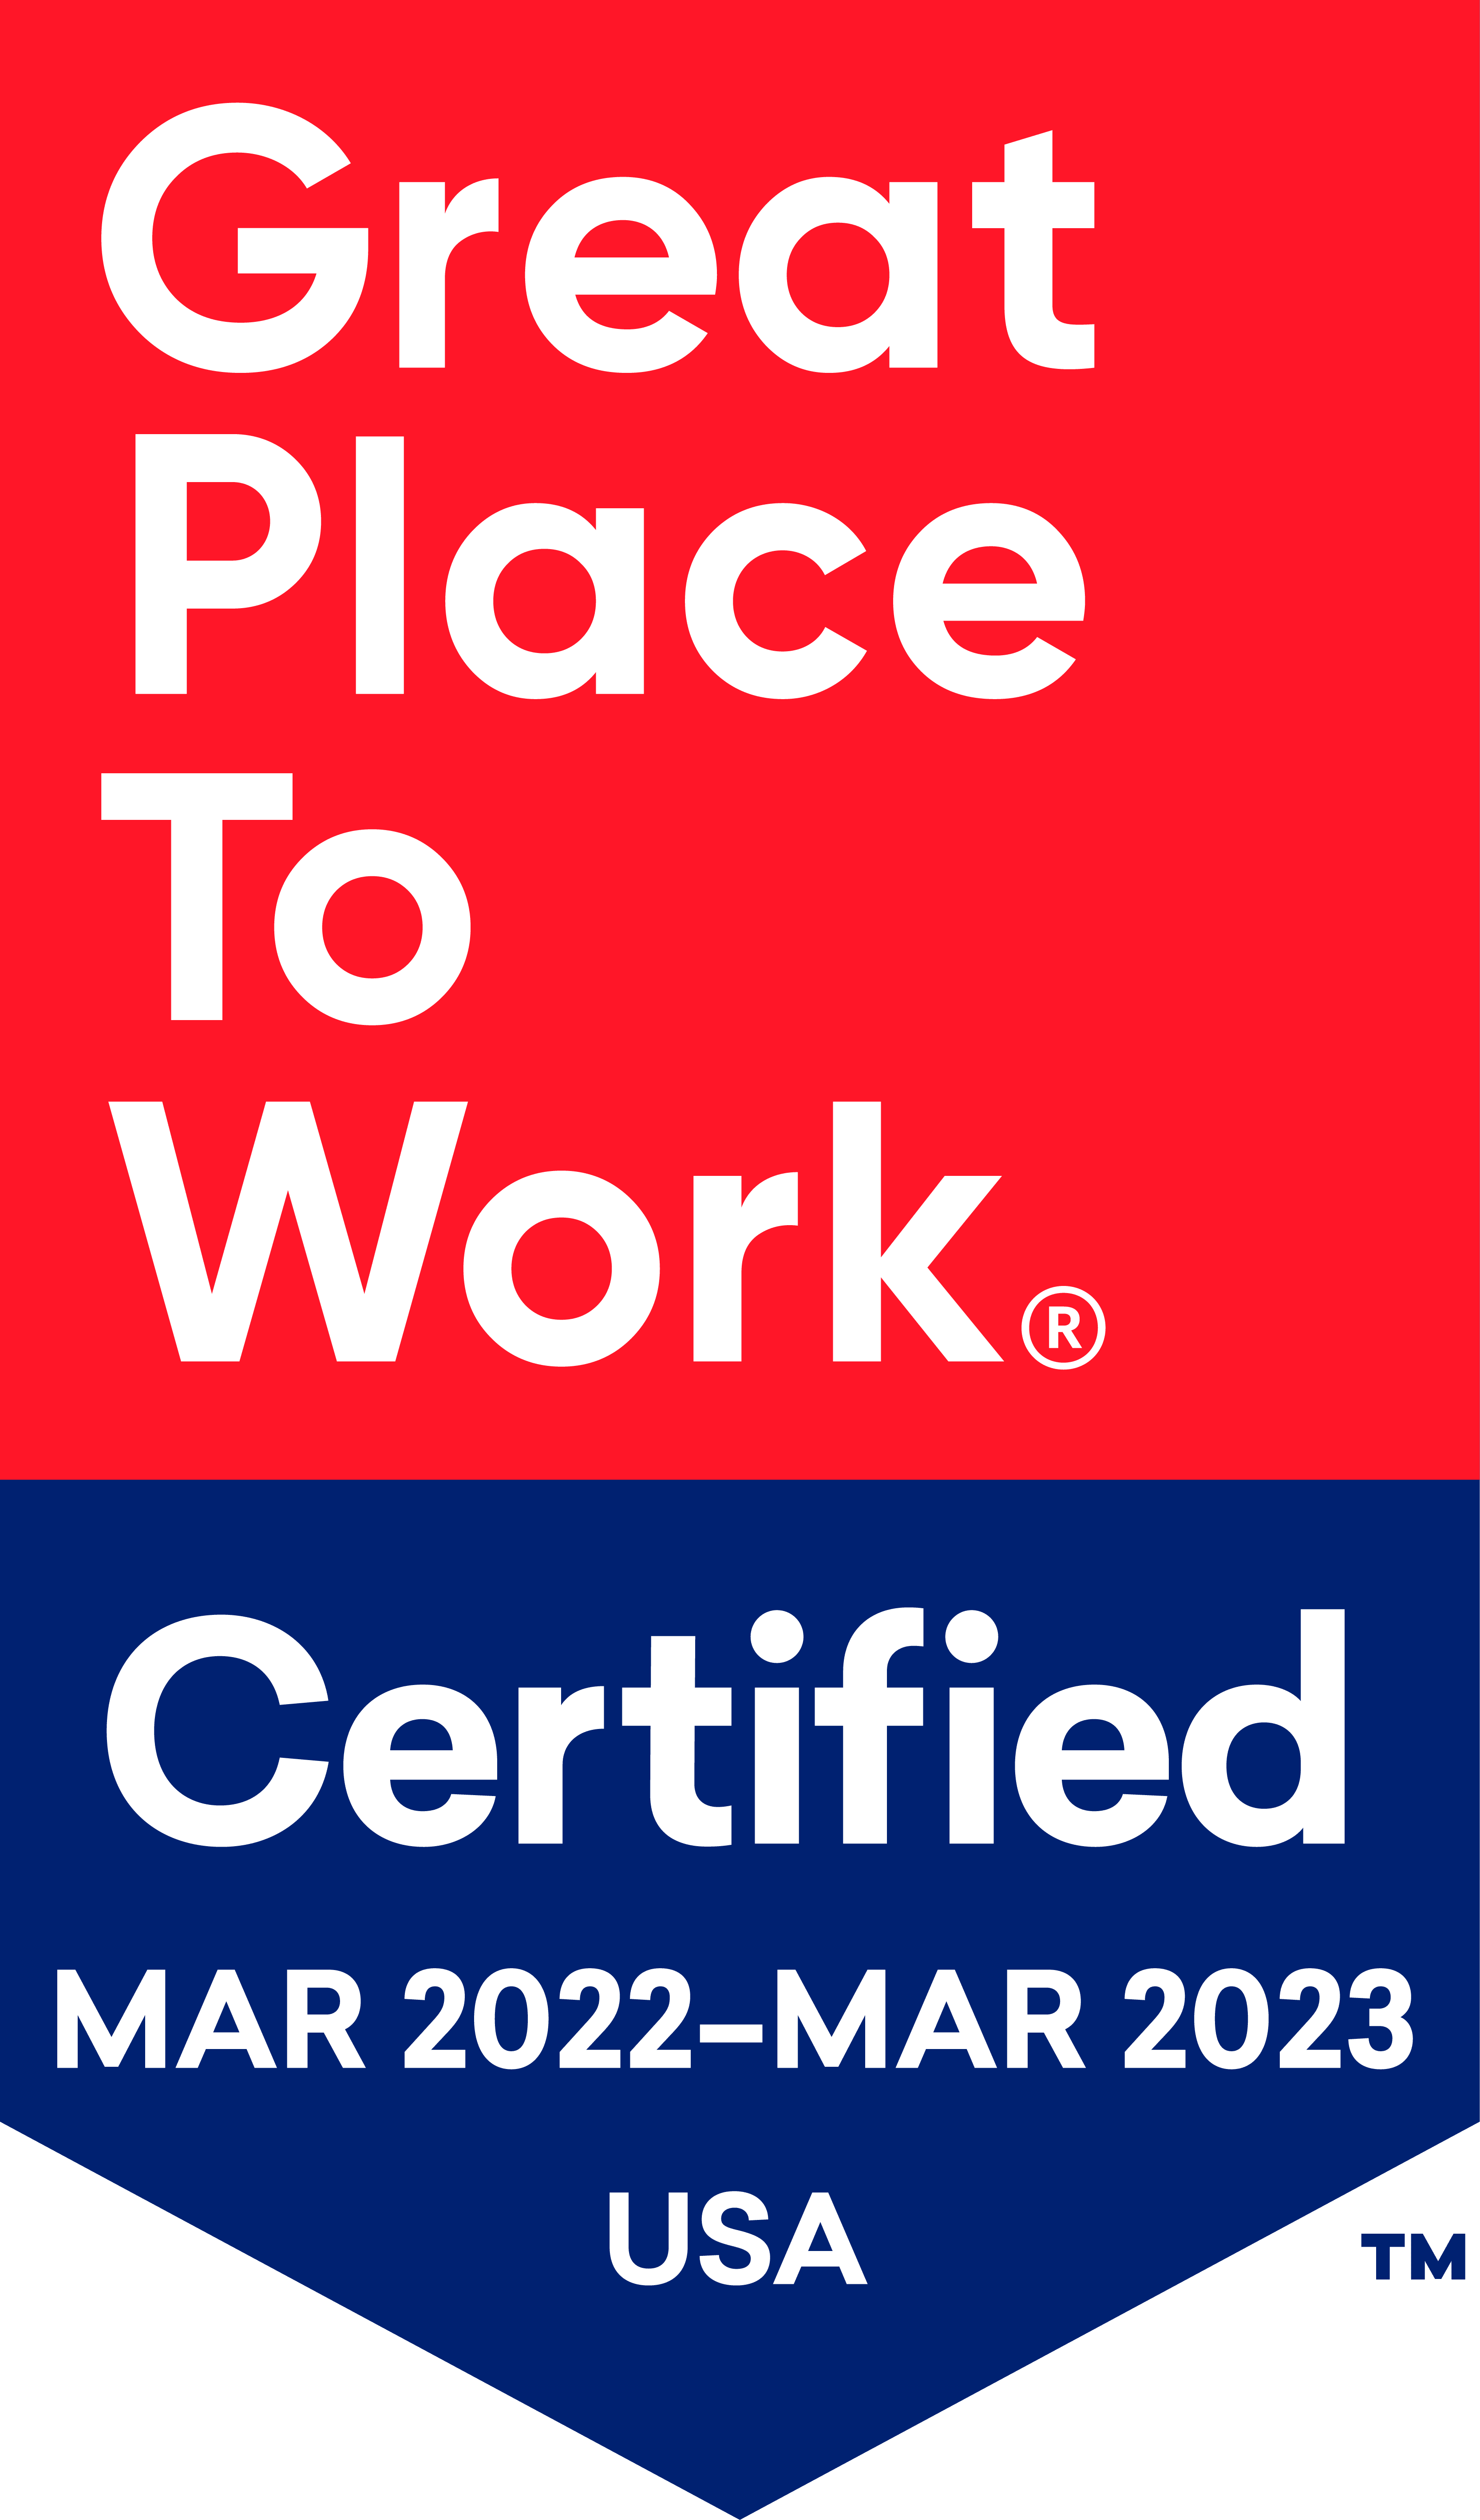 Great places to work badge for The Keystones of Cedar Rapids